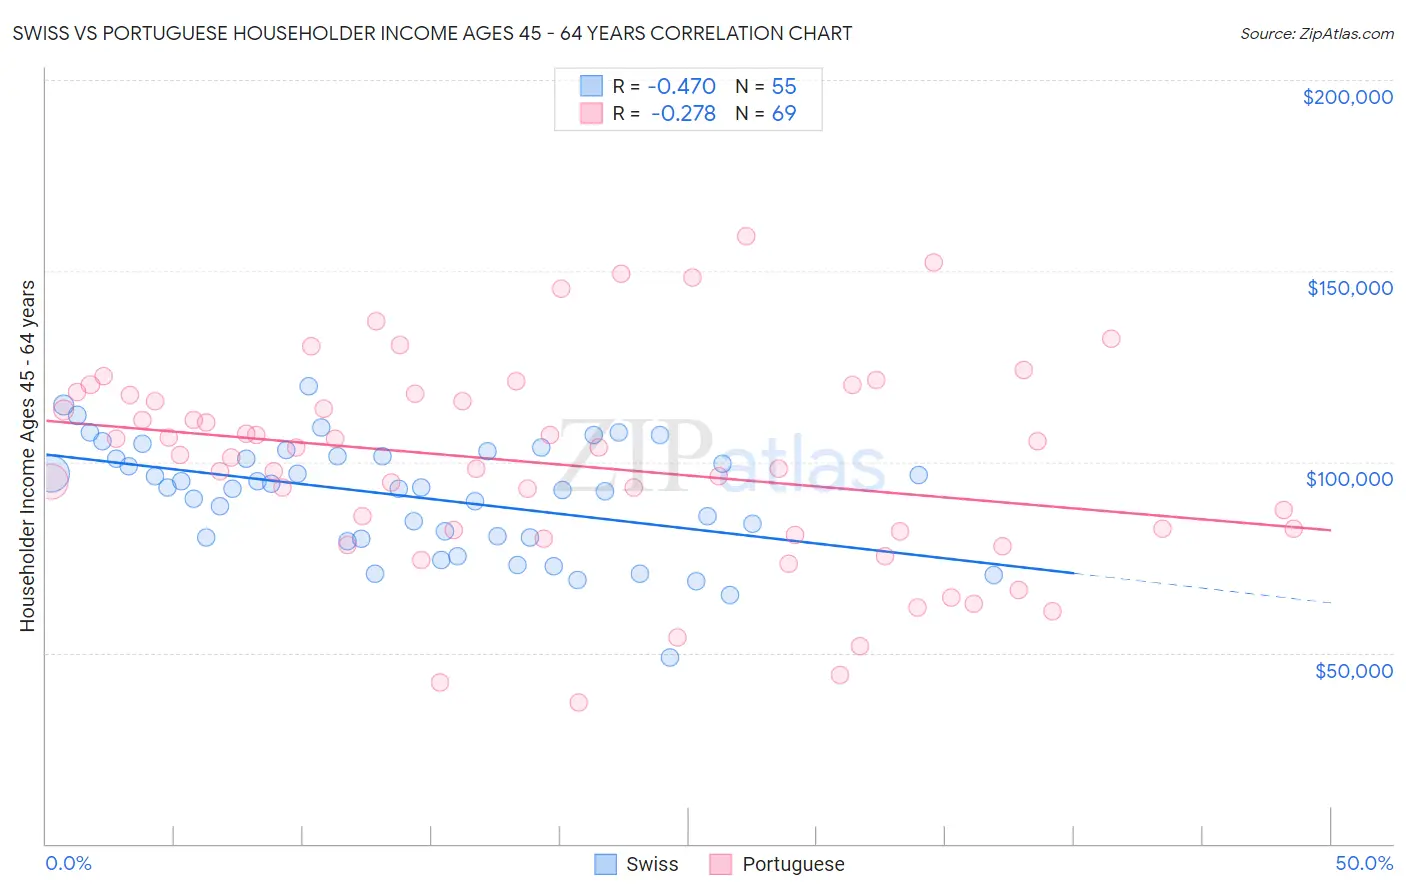 Swiss vs Portuguese Householder Income Ages 45 - 64 years